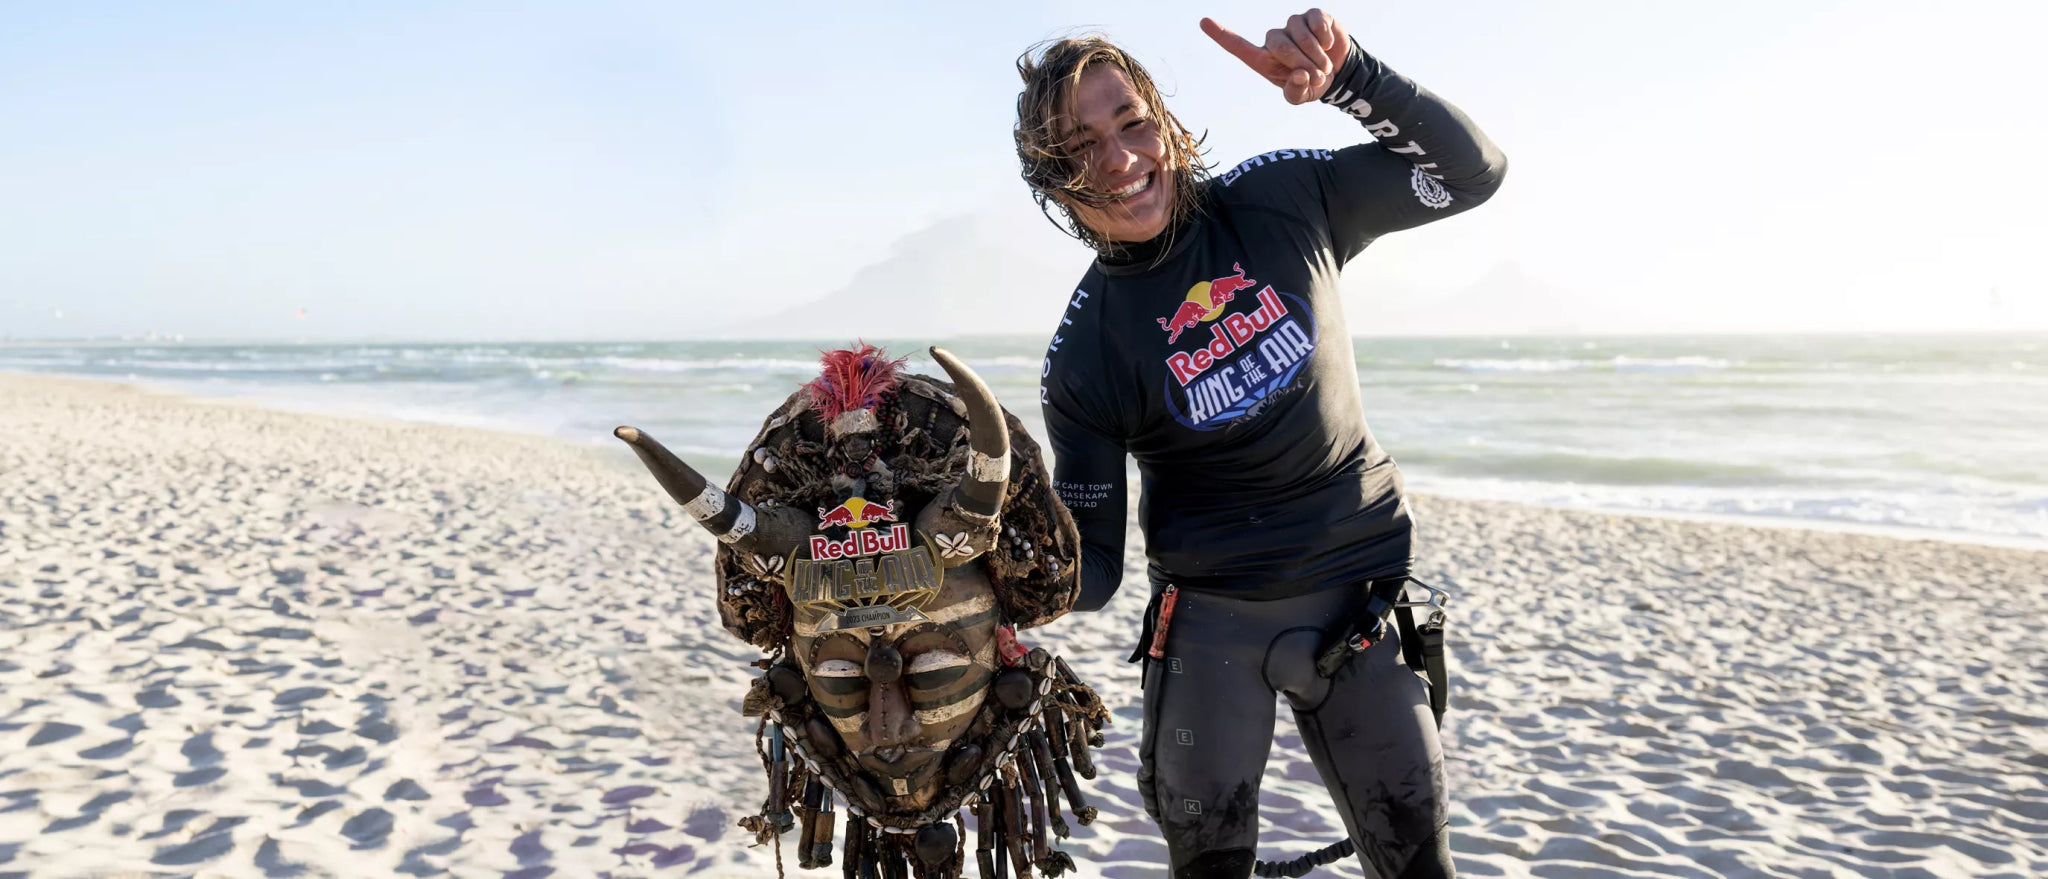 Duotone Kiteboarding Win Redbull King of the Air South Africa - Worthing Watersports